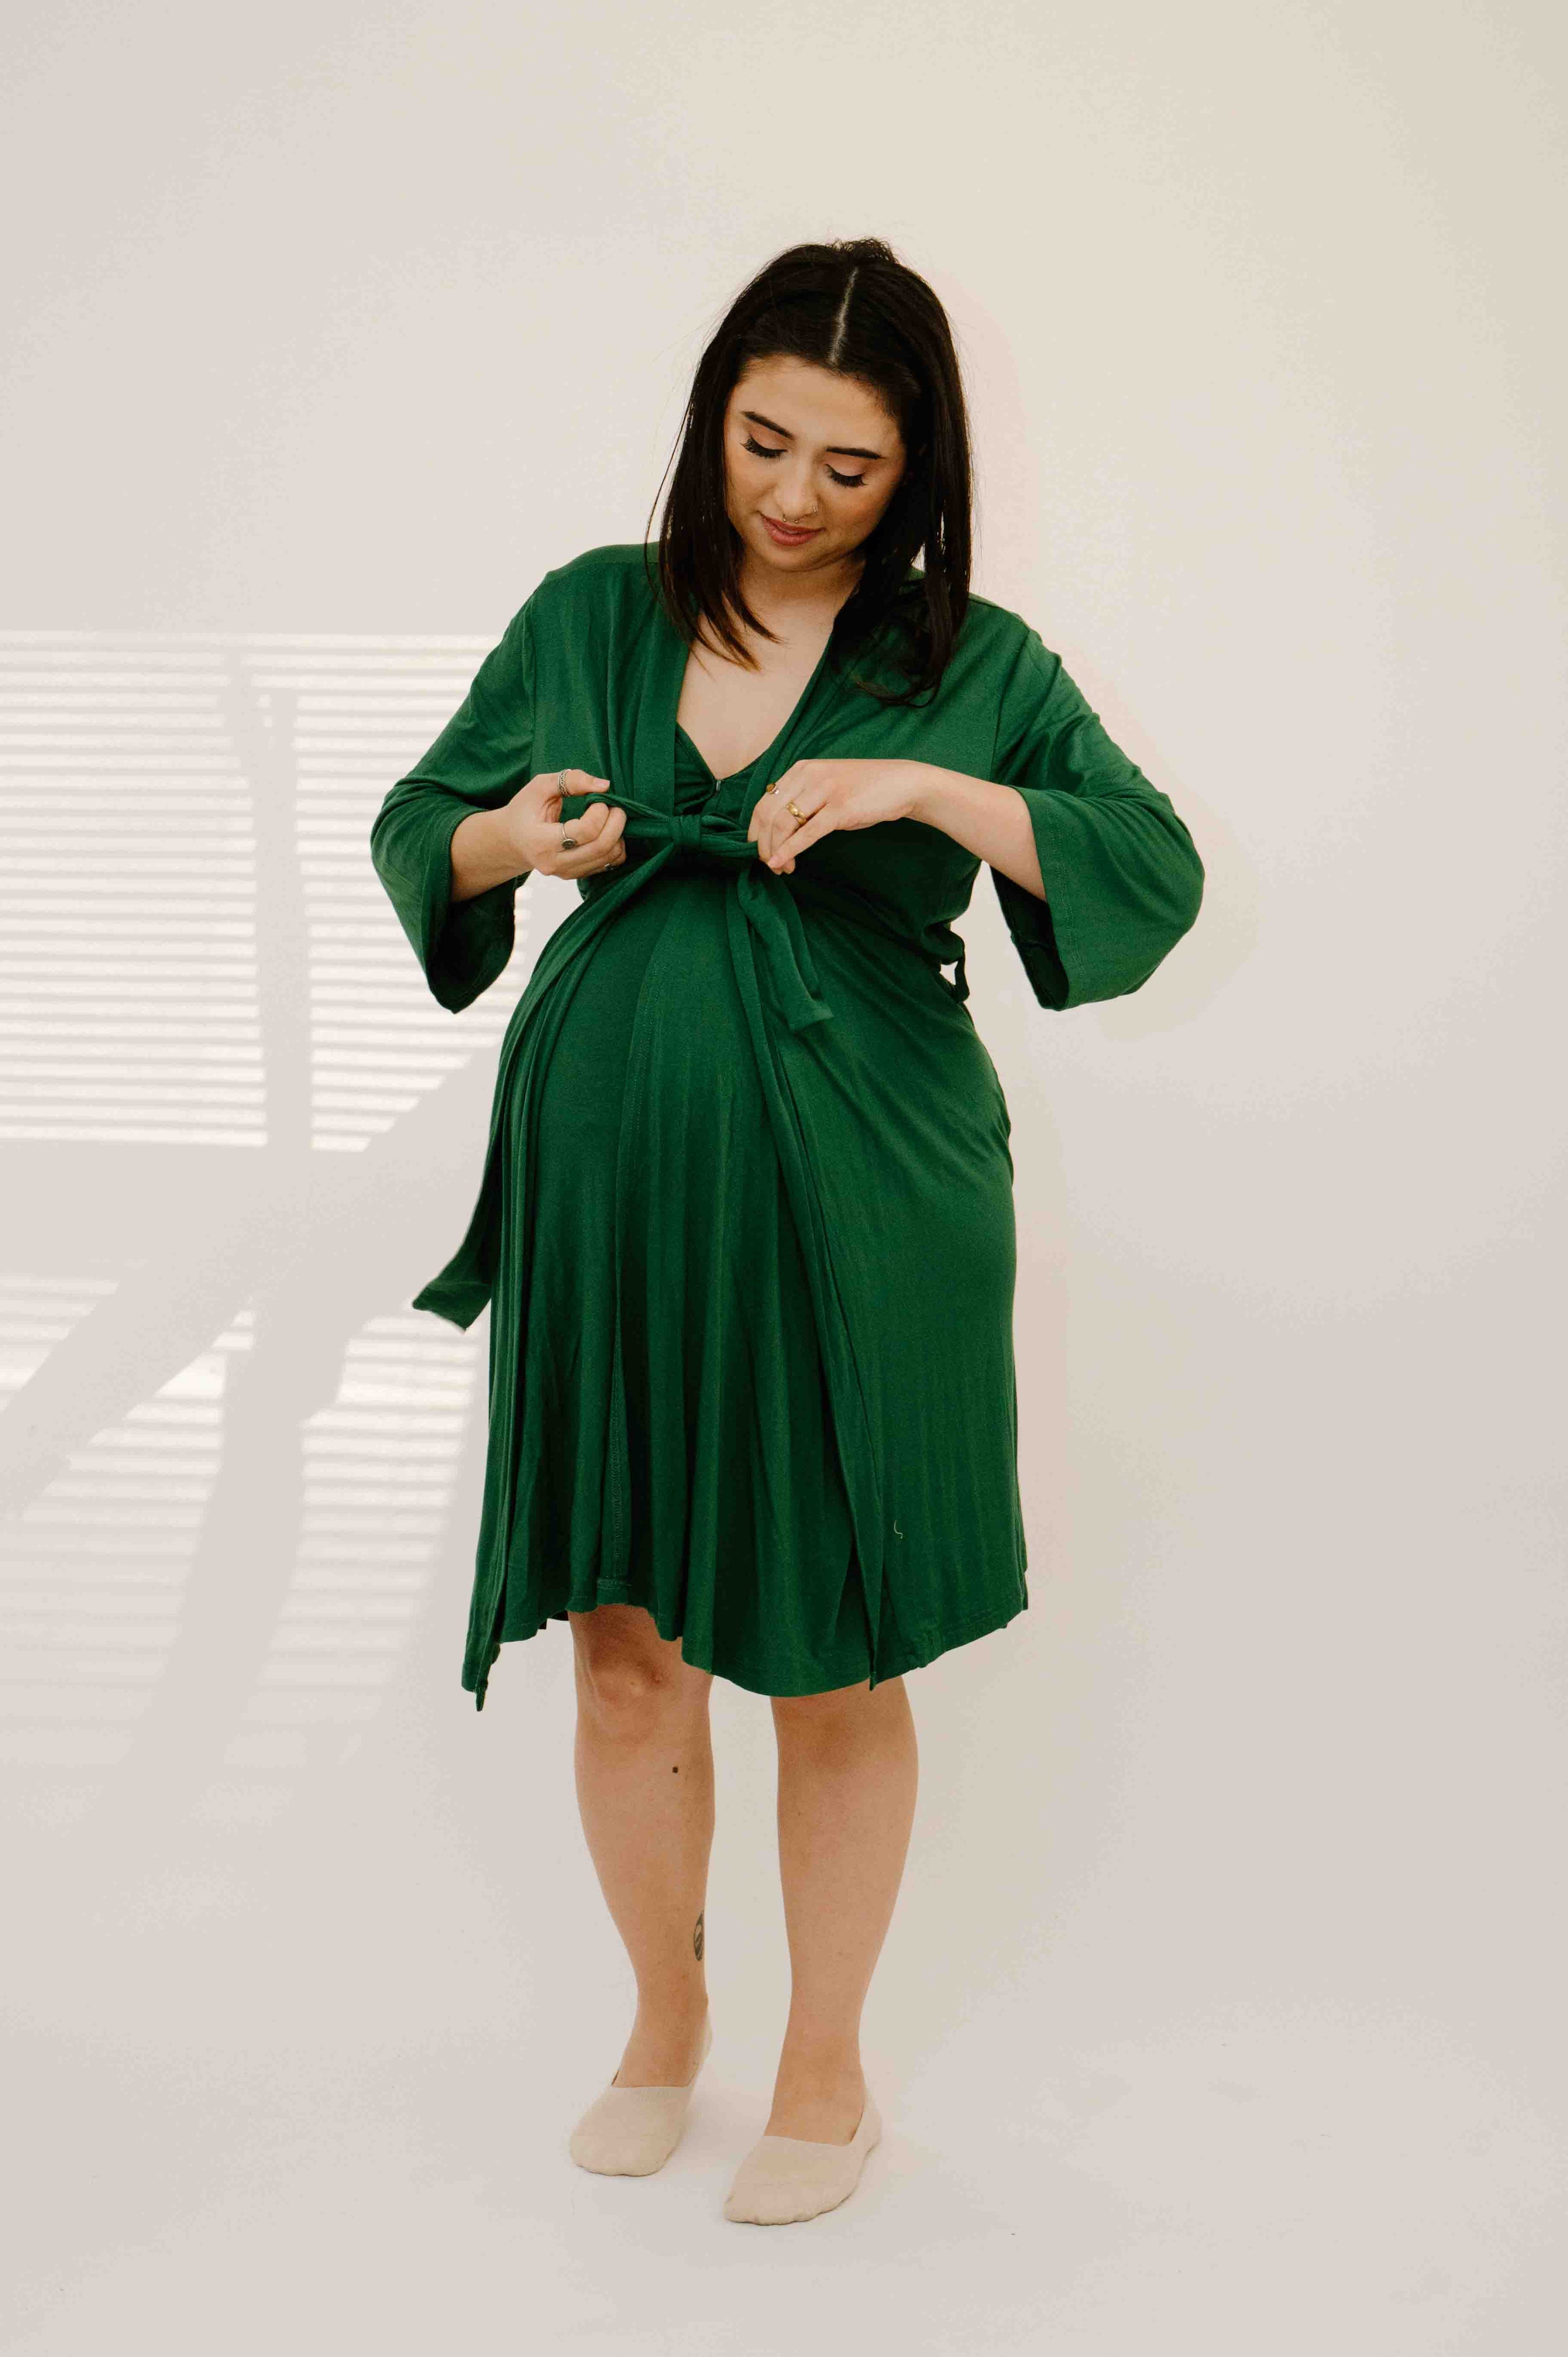 Robes in Emerald